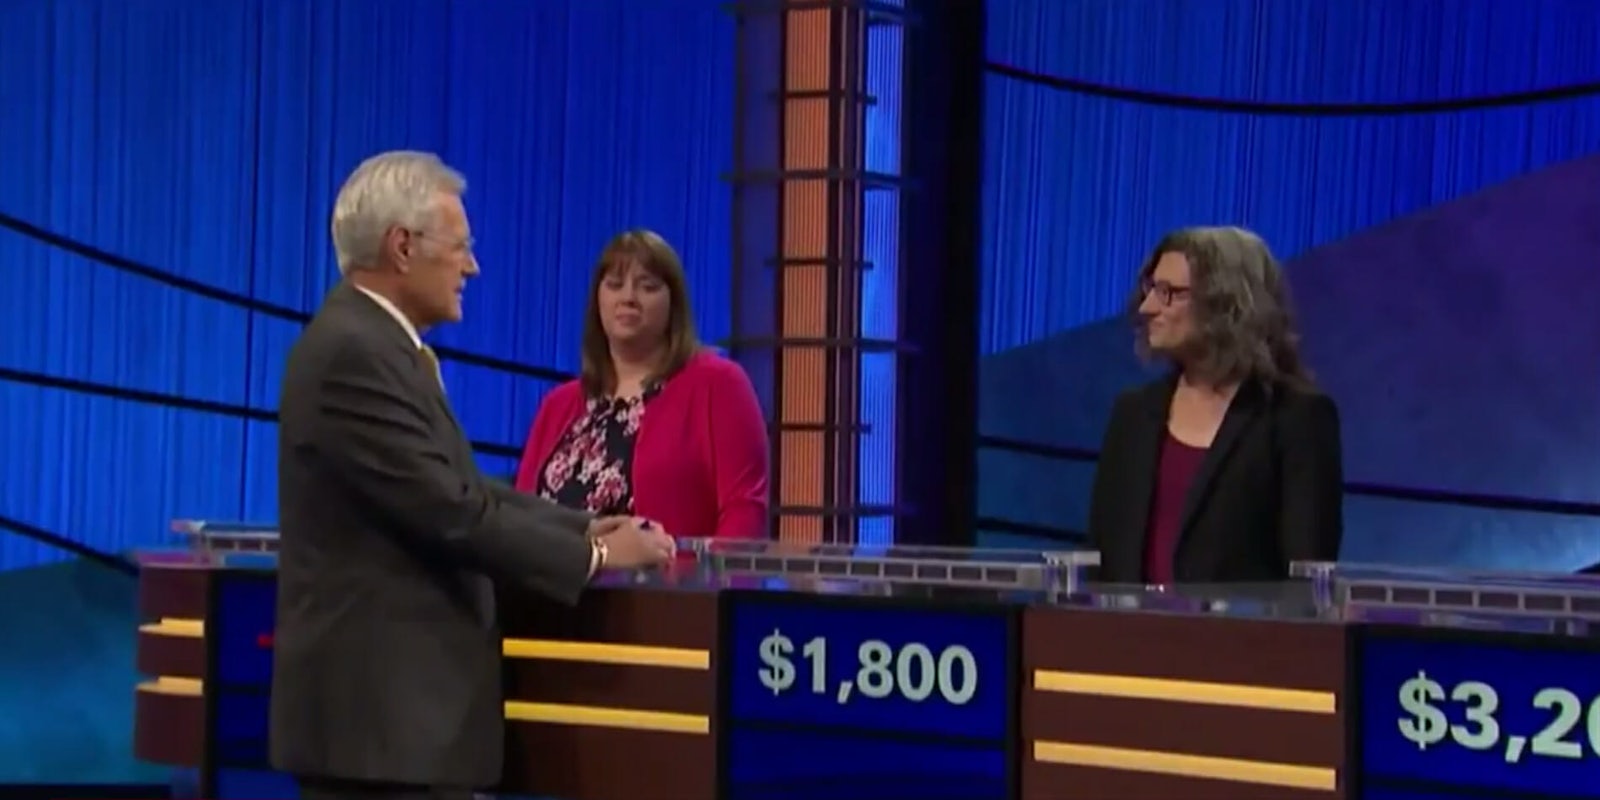 Alex Trebek is under fire on Twitter for making a sexist comment to a 'Jeopardy!' contestant.